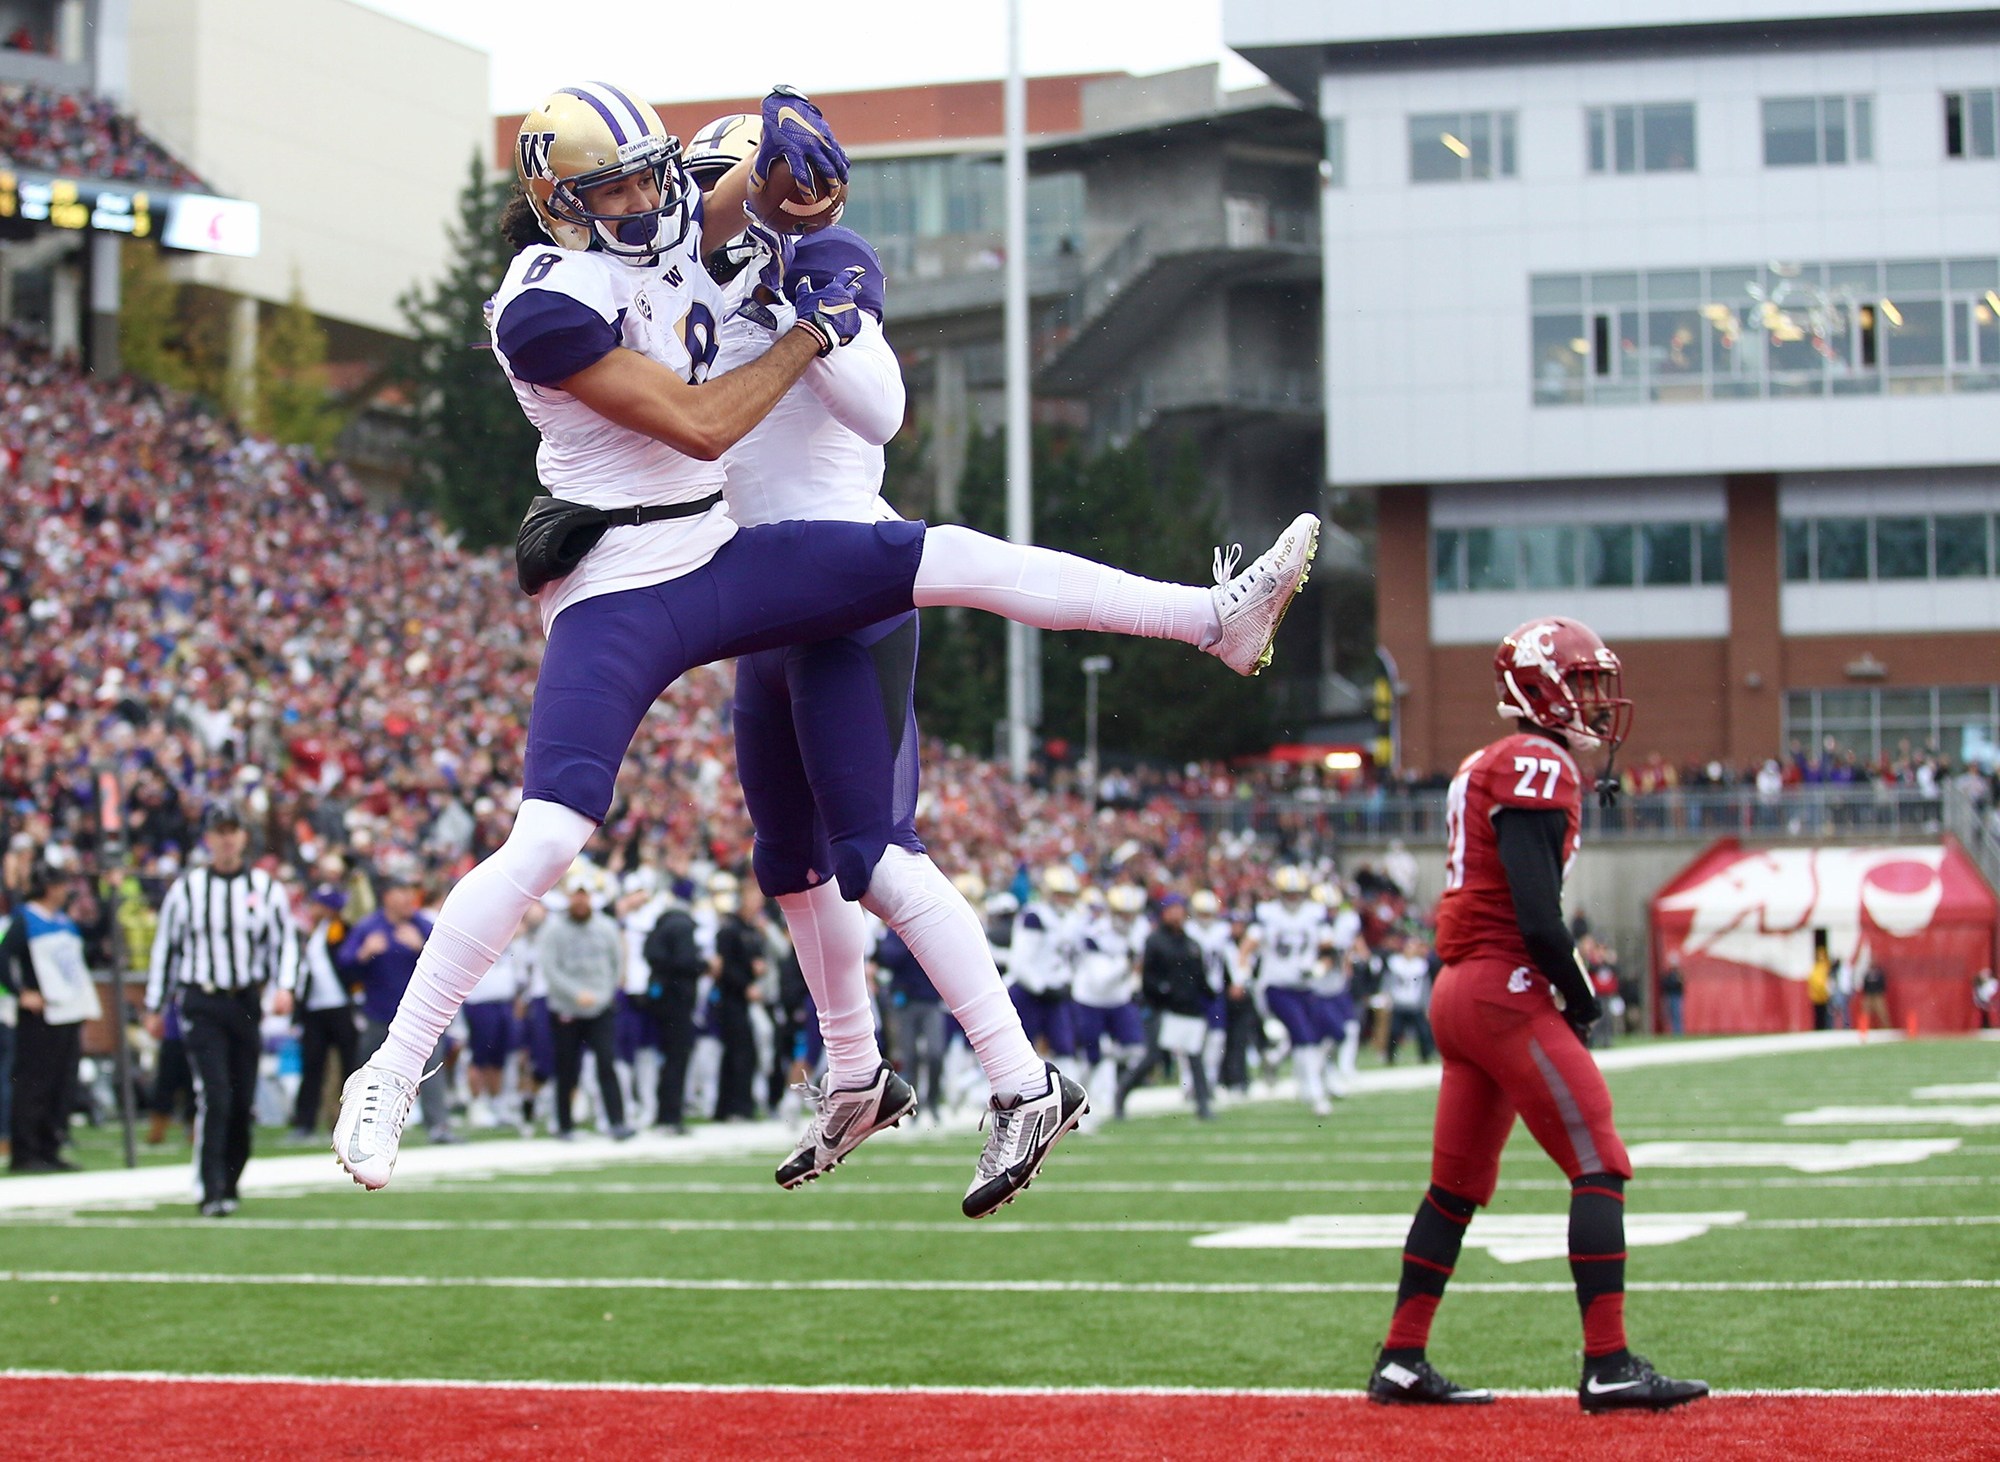 Washington’s Dante Pettis and John Ross celebrate Pettis’ touchdown in the first quarter to put the Huskies up 14-0 against Washington State in the 109th Apple Cup at Martin Stadium in Pullman, Wash., on Friday, Nov. 25, 2016. Washington won, 45-17. (Lindsey Wasson/Seattle Times/TNS)